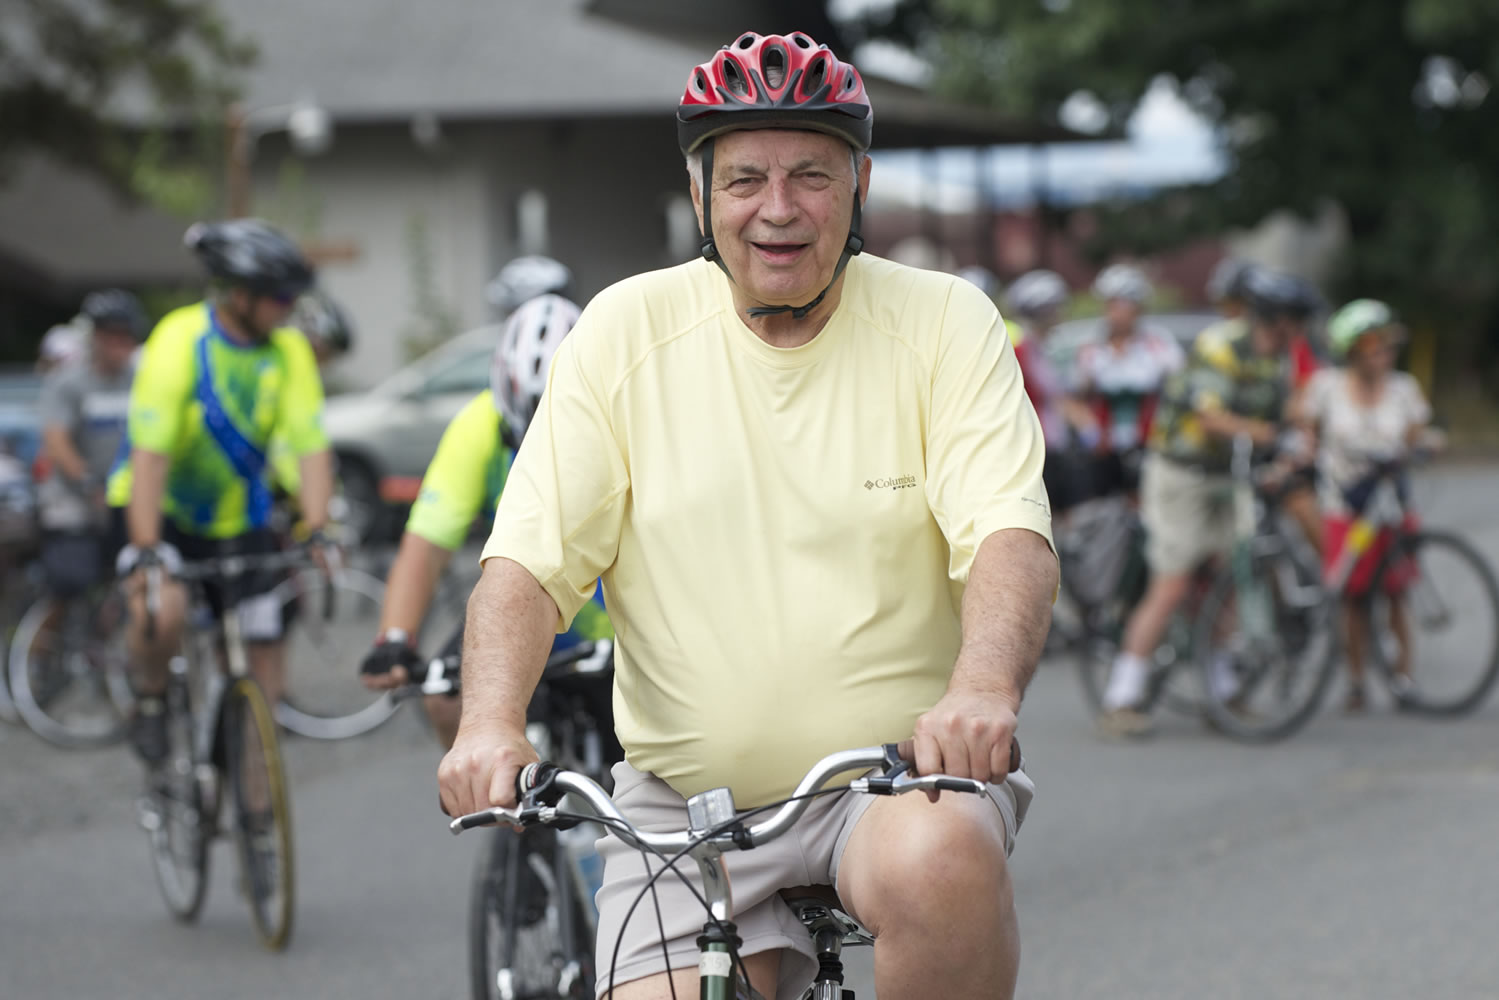 Vancouver City Councilmember Bill Turlay  joins the bike tour from St.